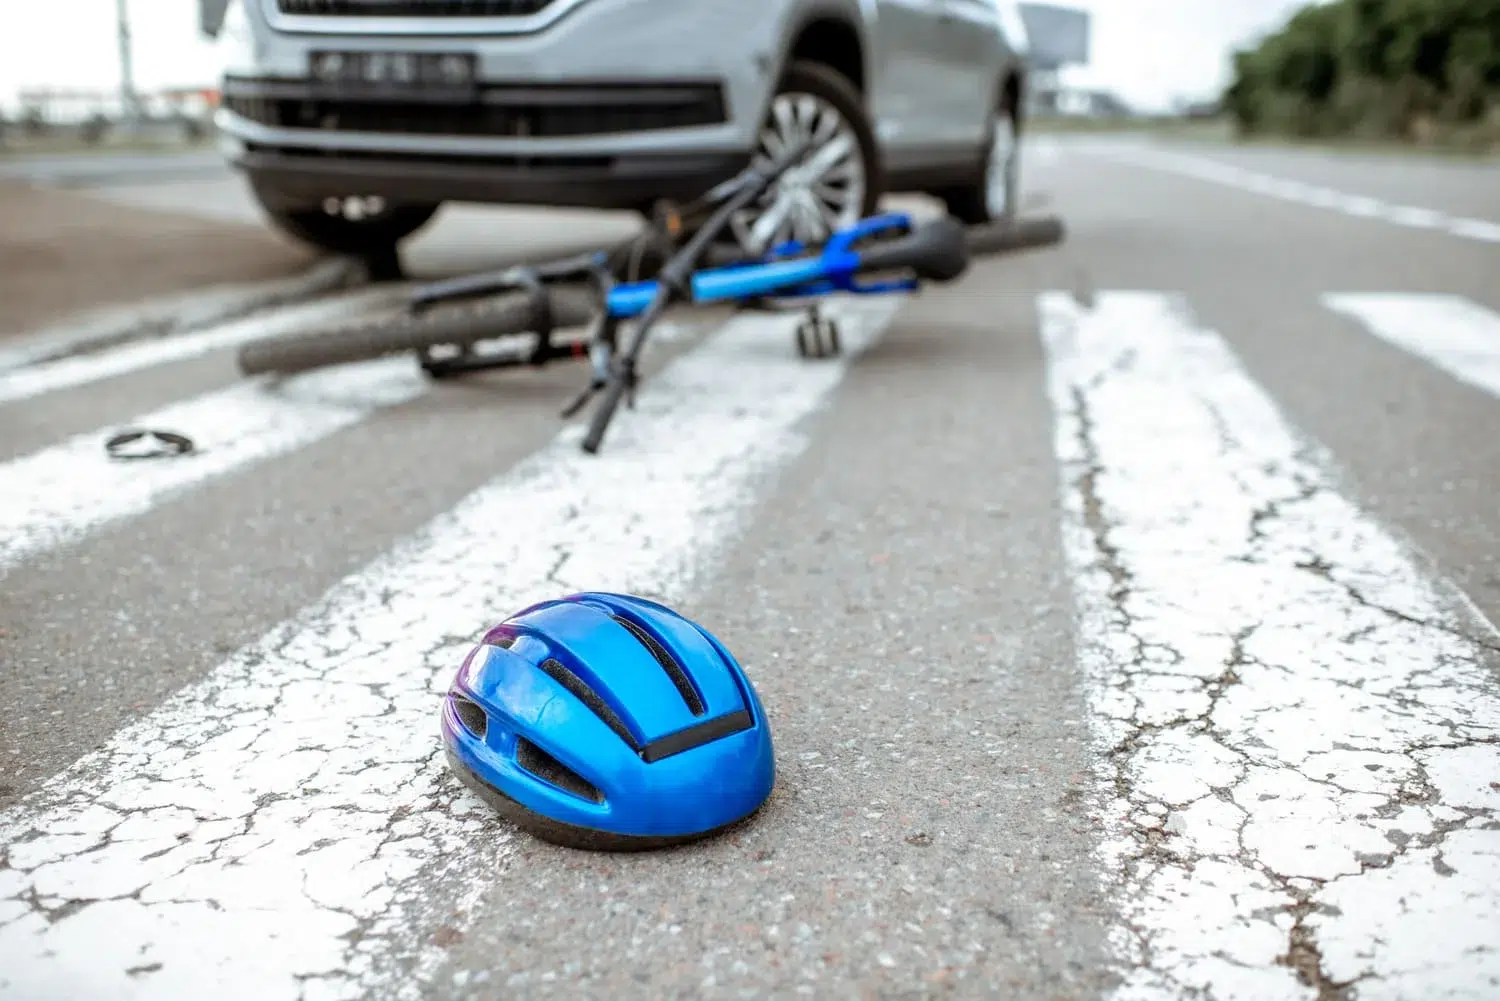 Personal Injury and Bike Accident Attorney's - AMS Law